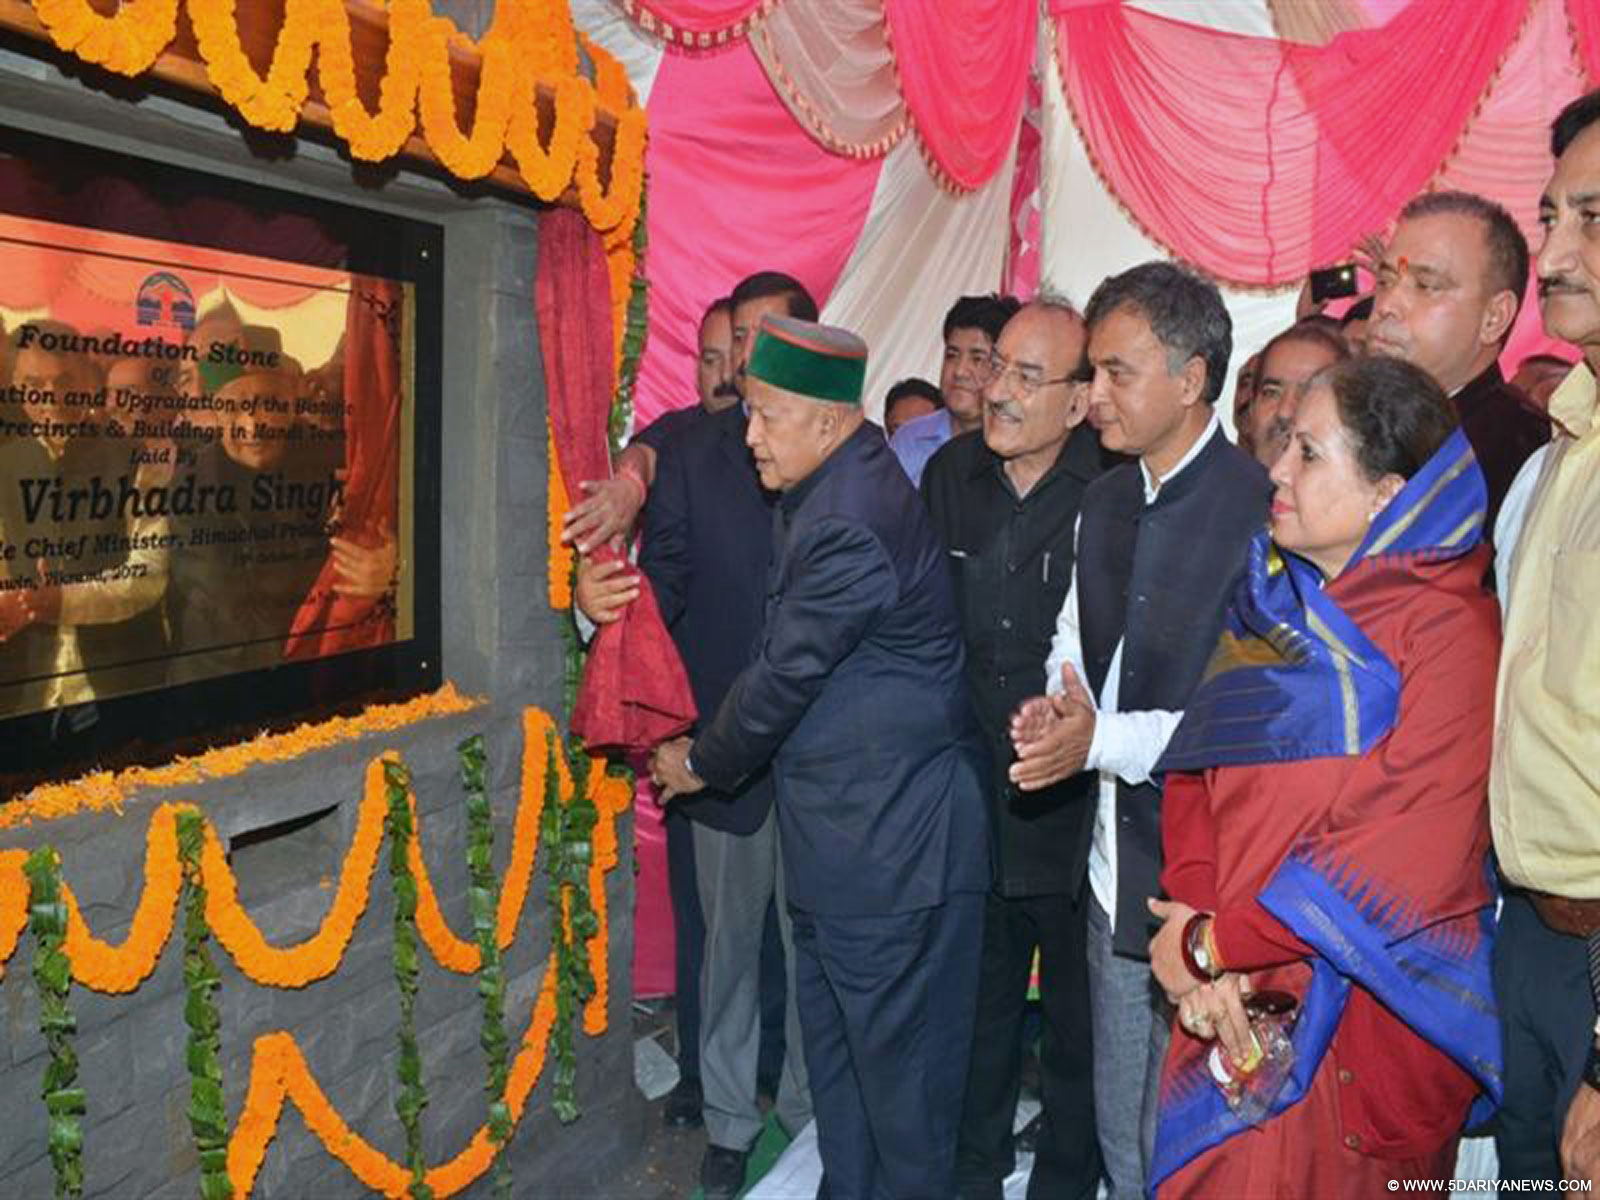 Chief Minister Shri Virbhadra Singh laying foundation stone of conservation and upgradation of the Historic Precinets and building project at Mandi on 15 October 2015.